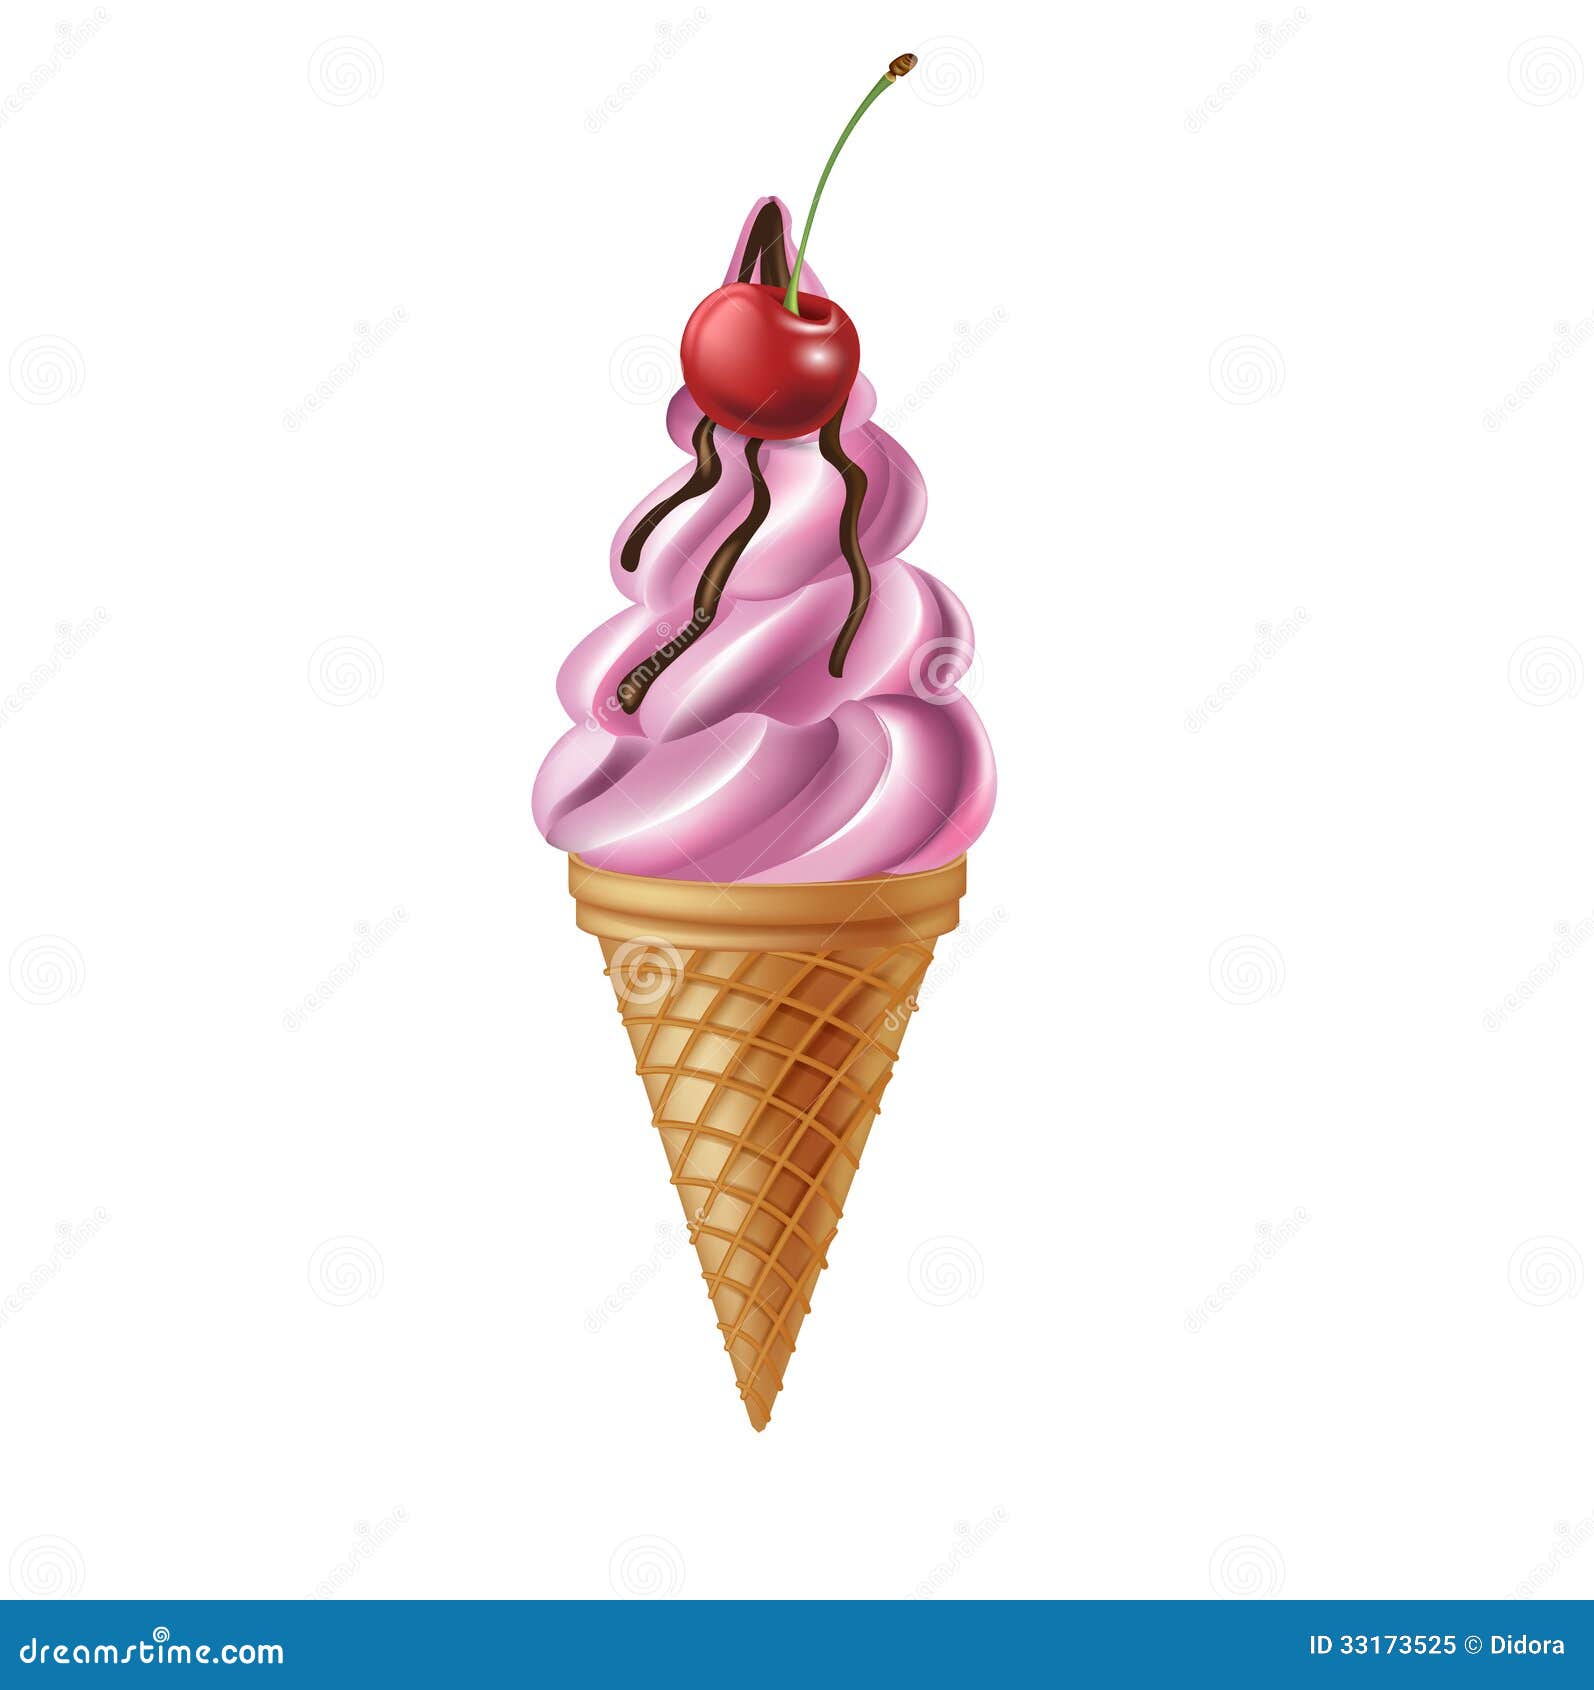 Top 95+ Images ice cream cone with cherry on top Excellent